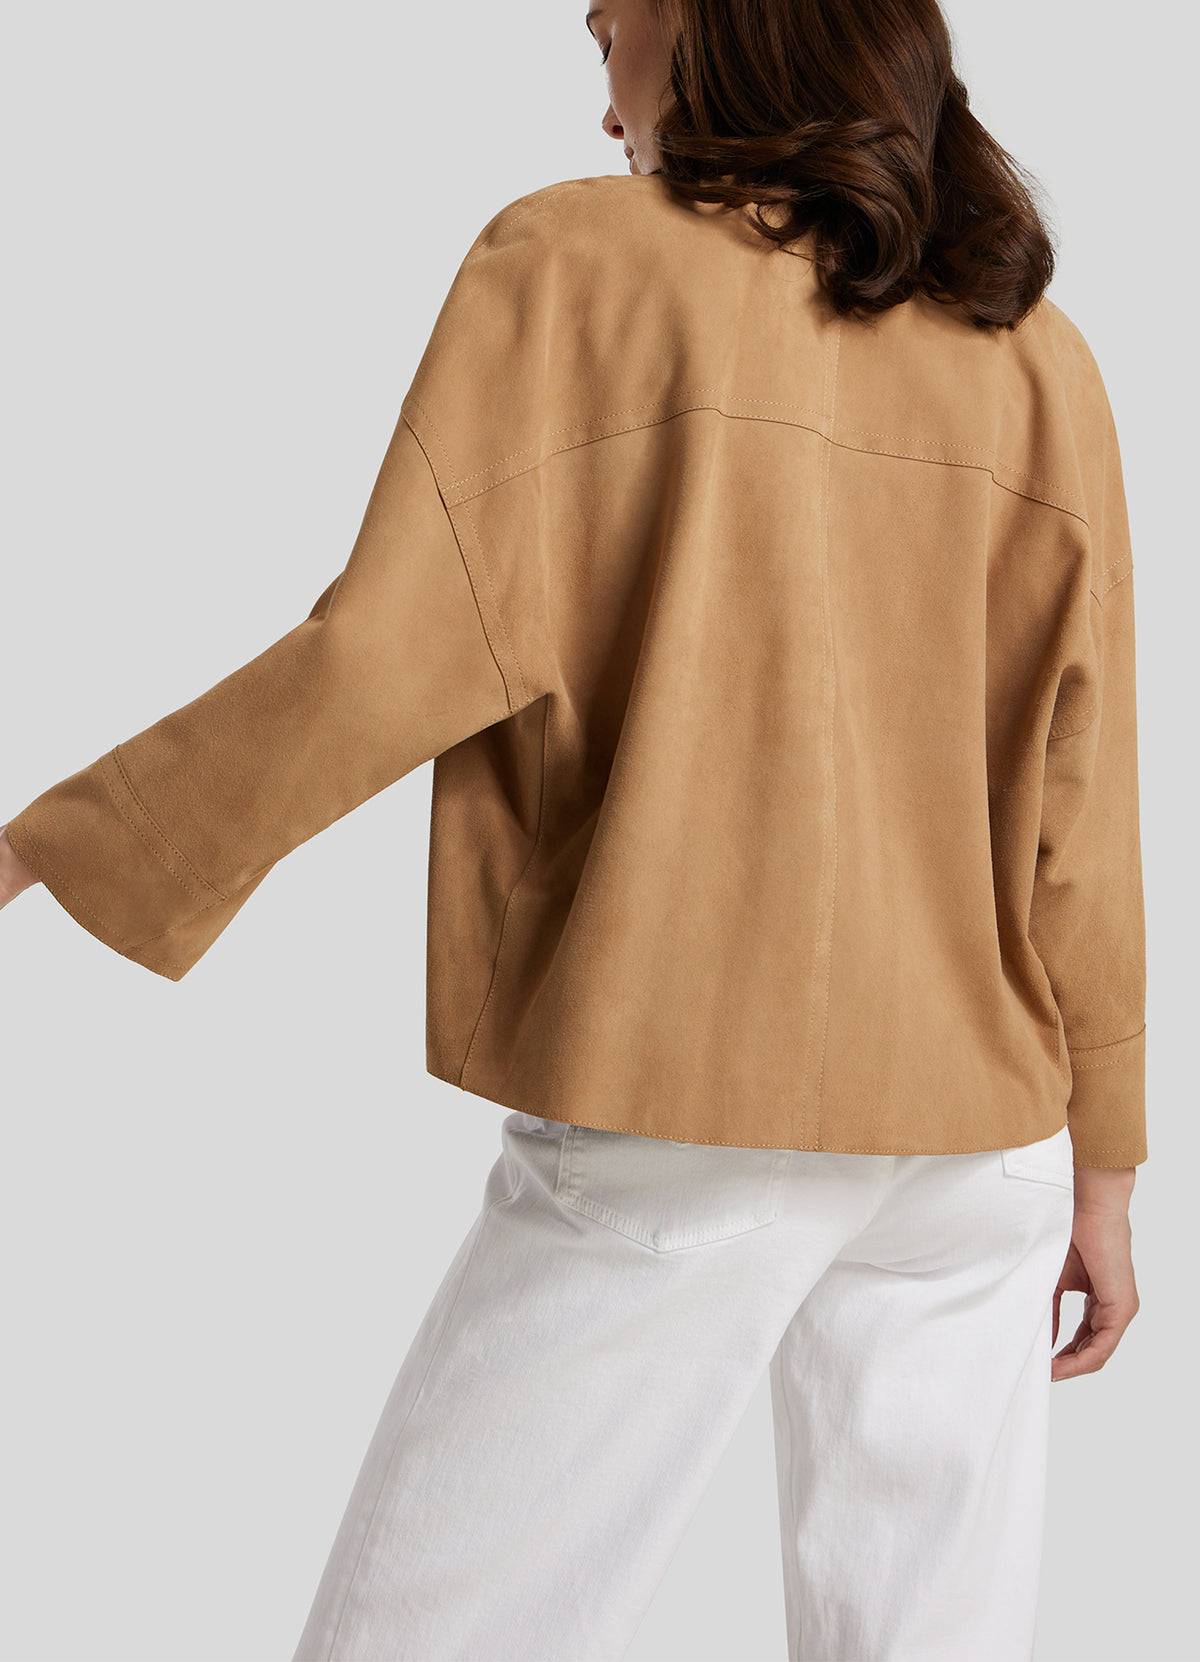 Womens Casual TAN Suede Leather Jacket